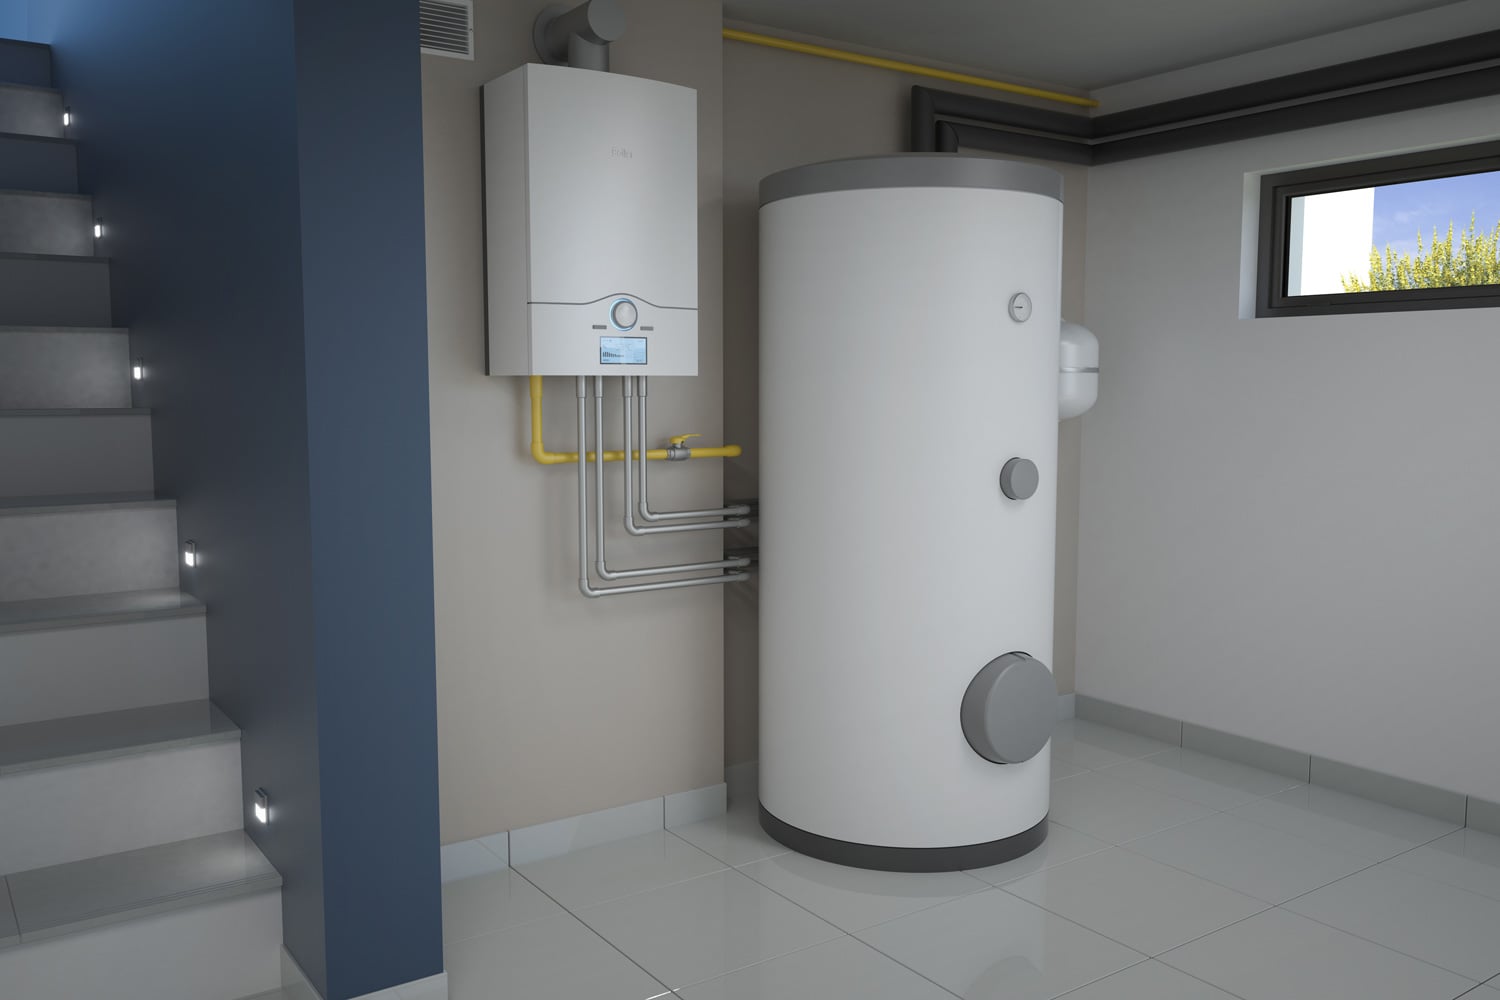 home heat system Boiler room - gas heating system